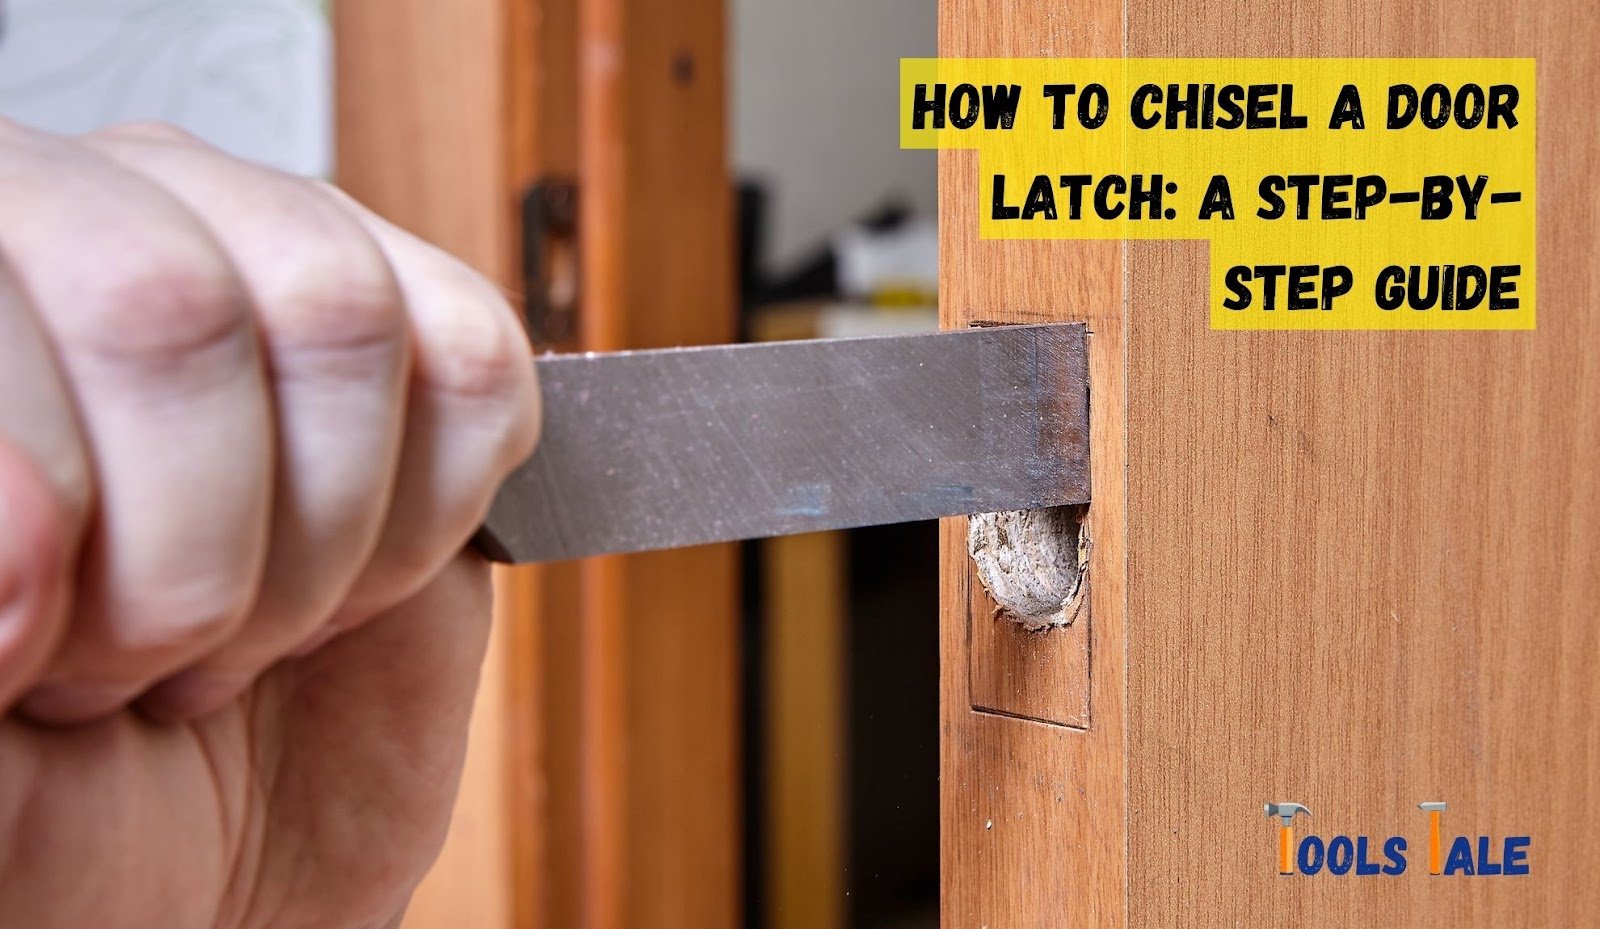 How to Chisel a Door Latch